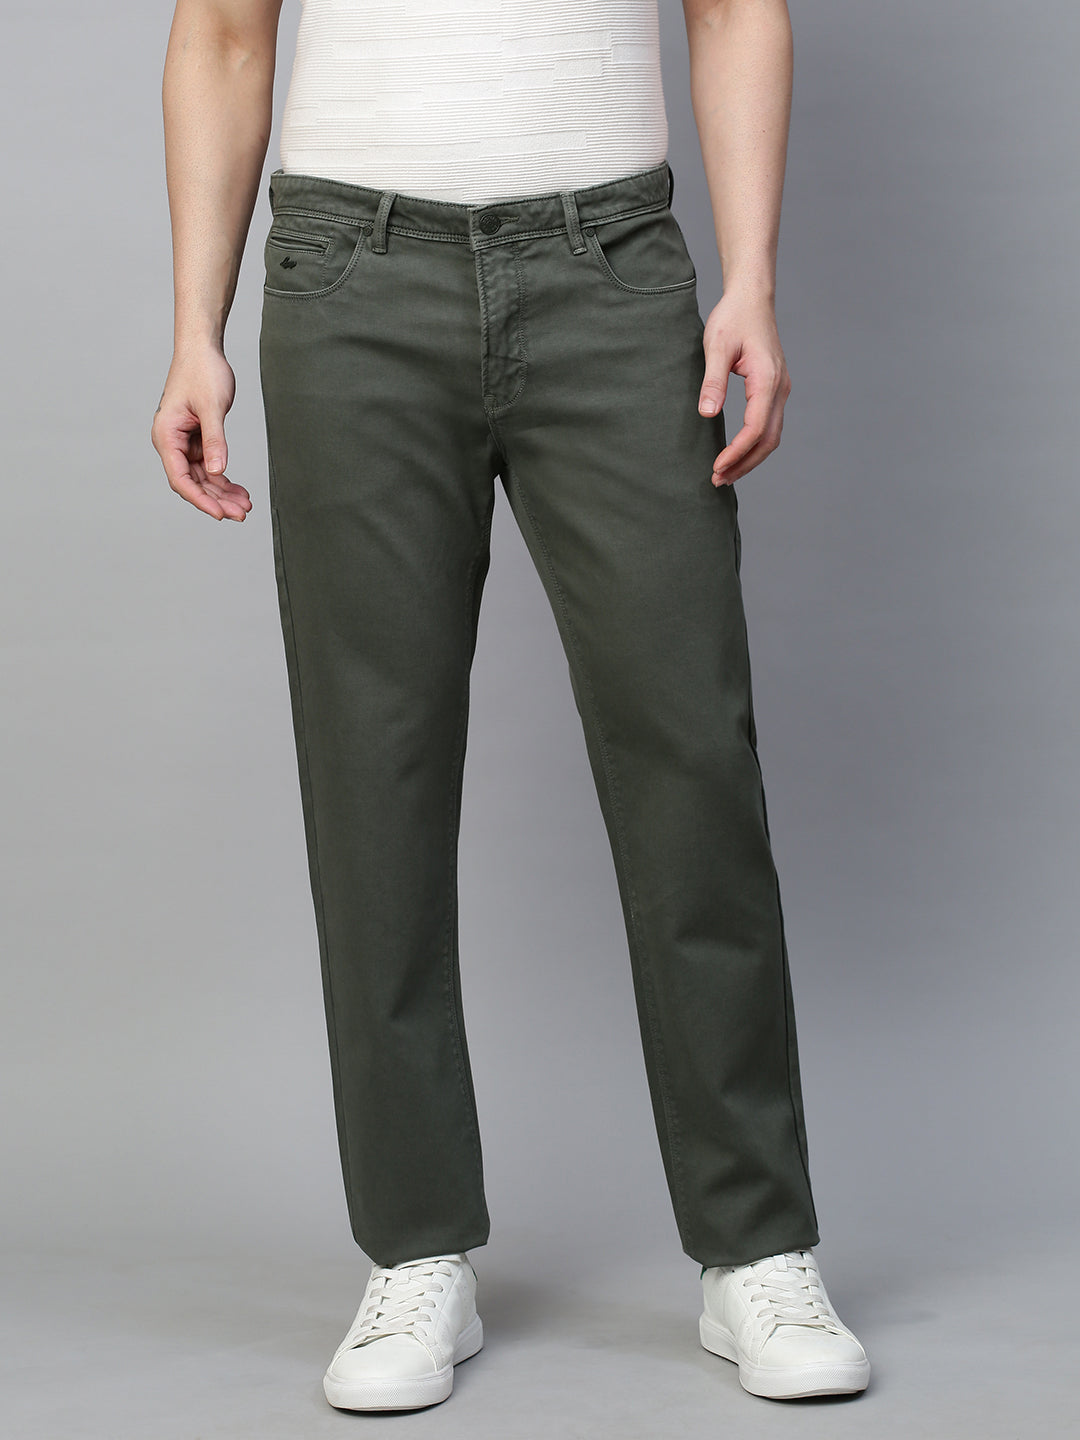 Genips Men's Olive Green Cotton Stretch Rico Slim Fit Solid 5 Pocket Trouser